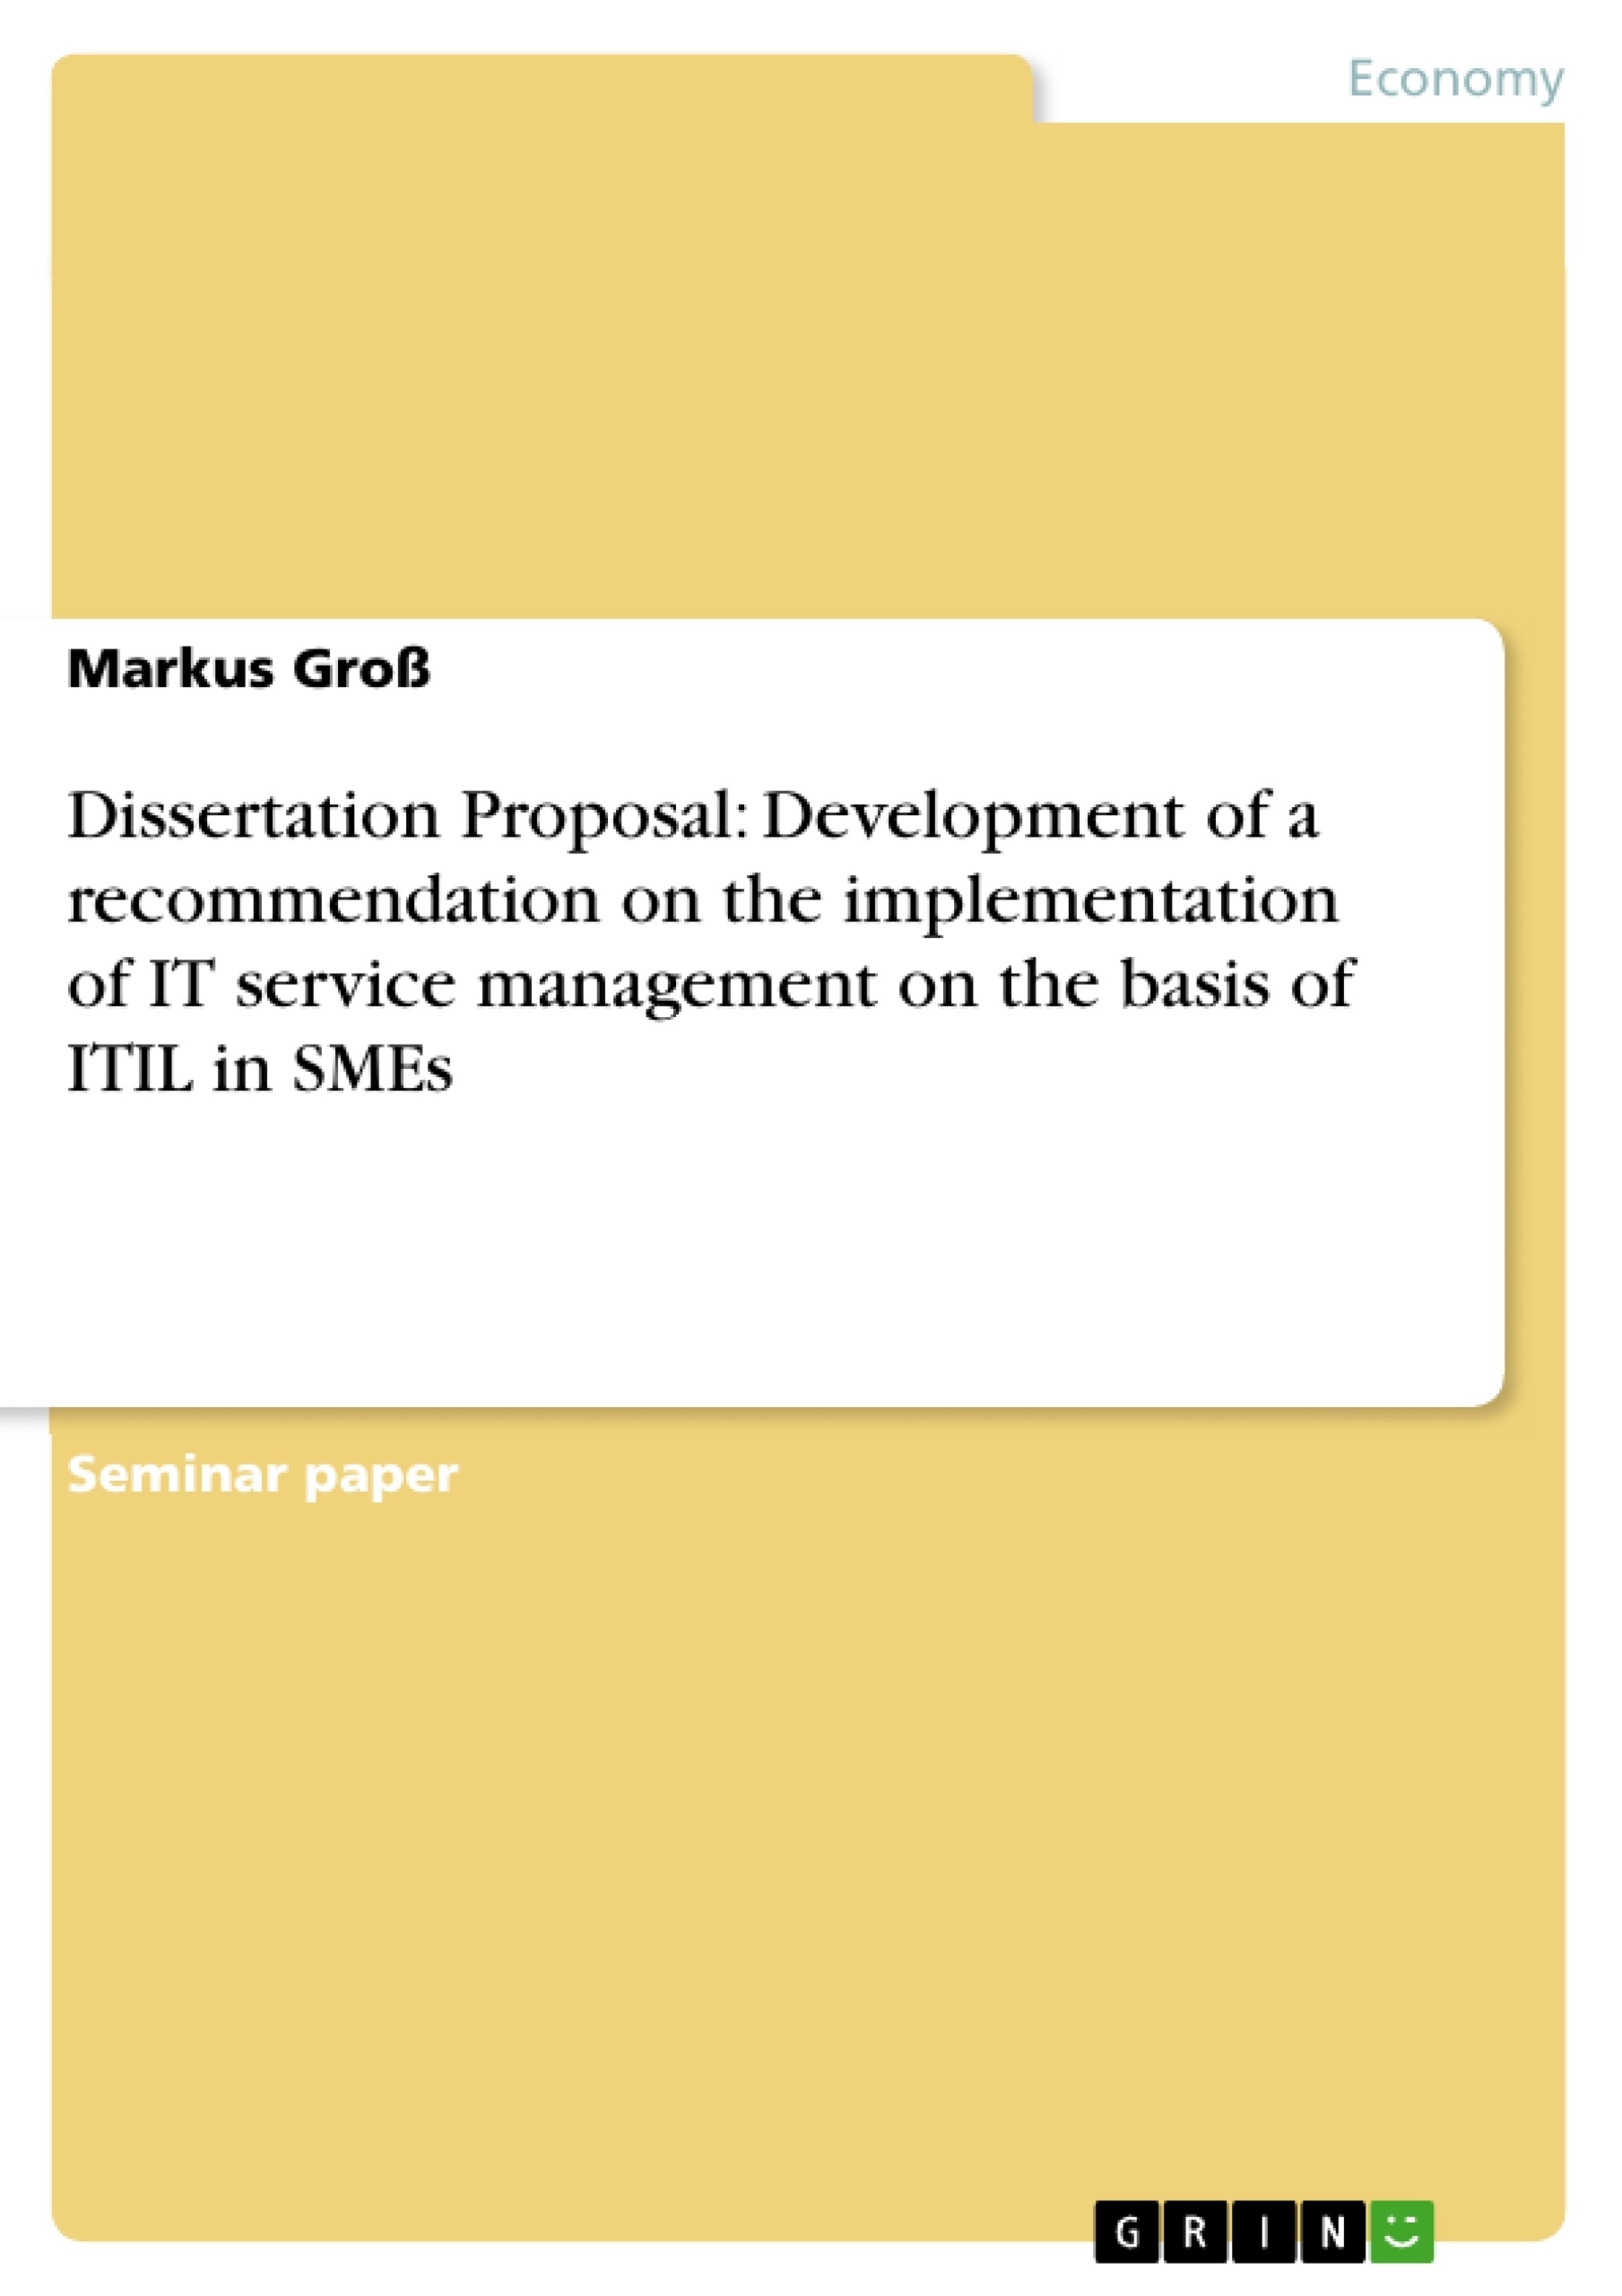 Title: Dissertation Proposal: Development of a recommendation on the implementation of IT service management on the basis of ITIL in SMEs